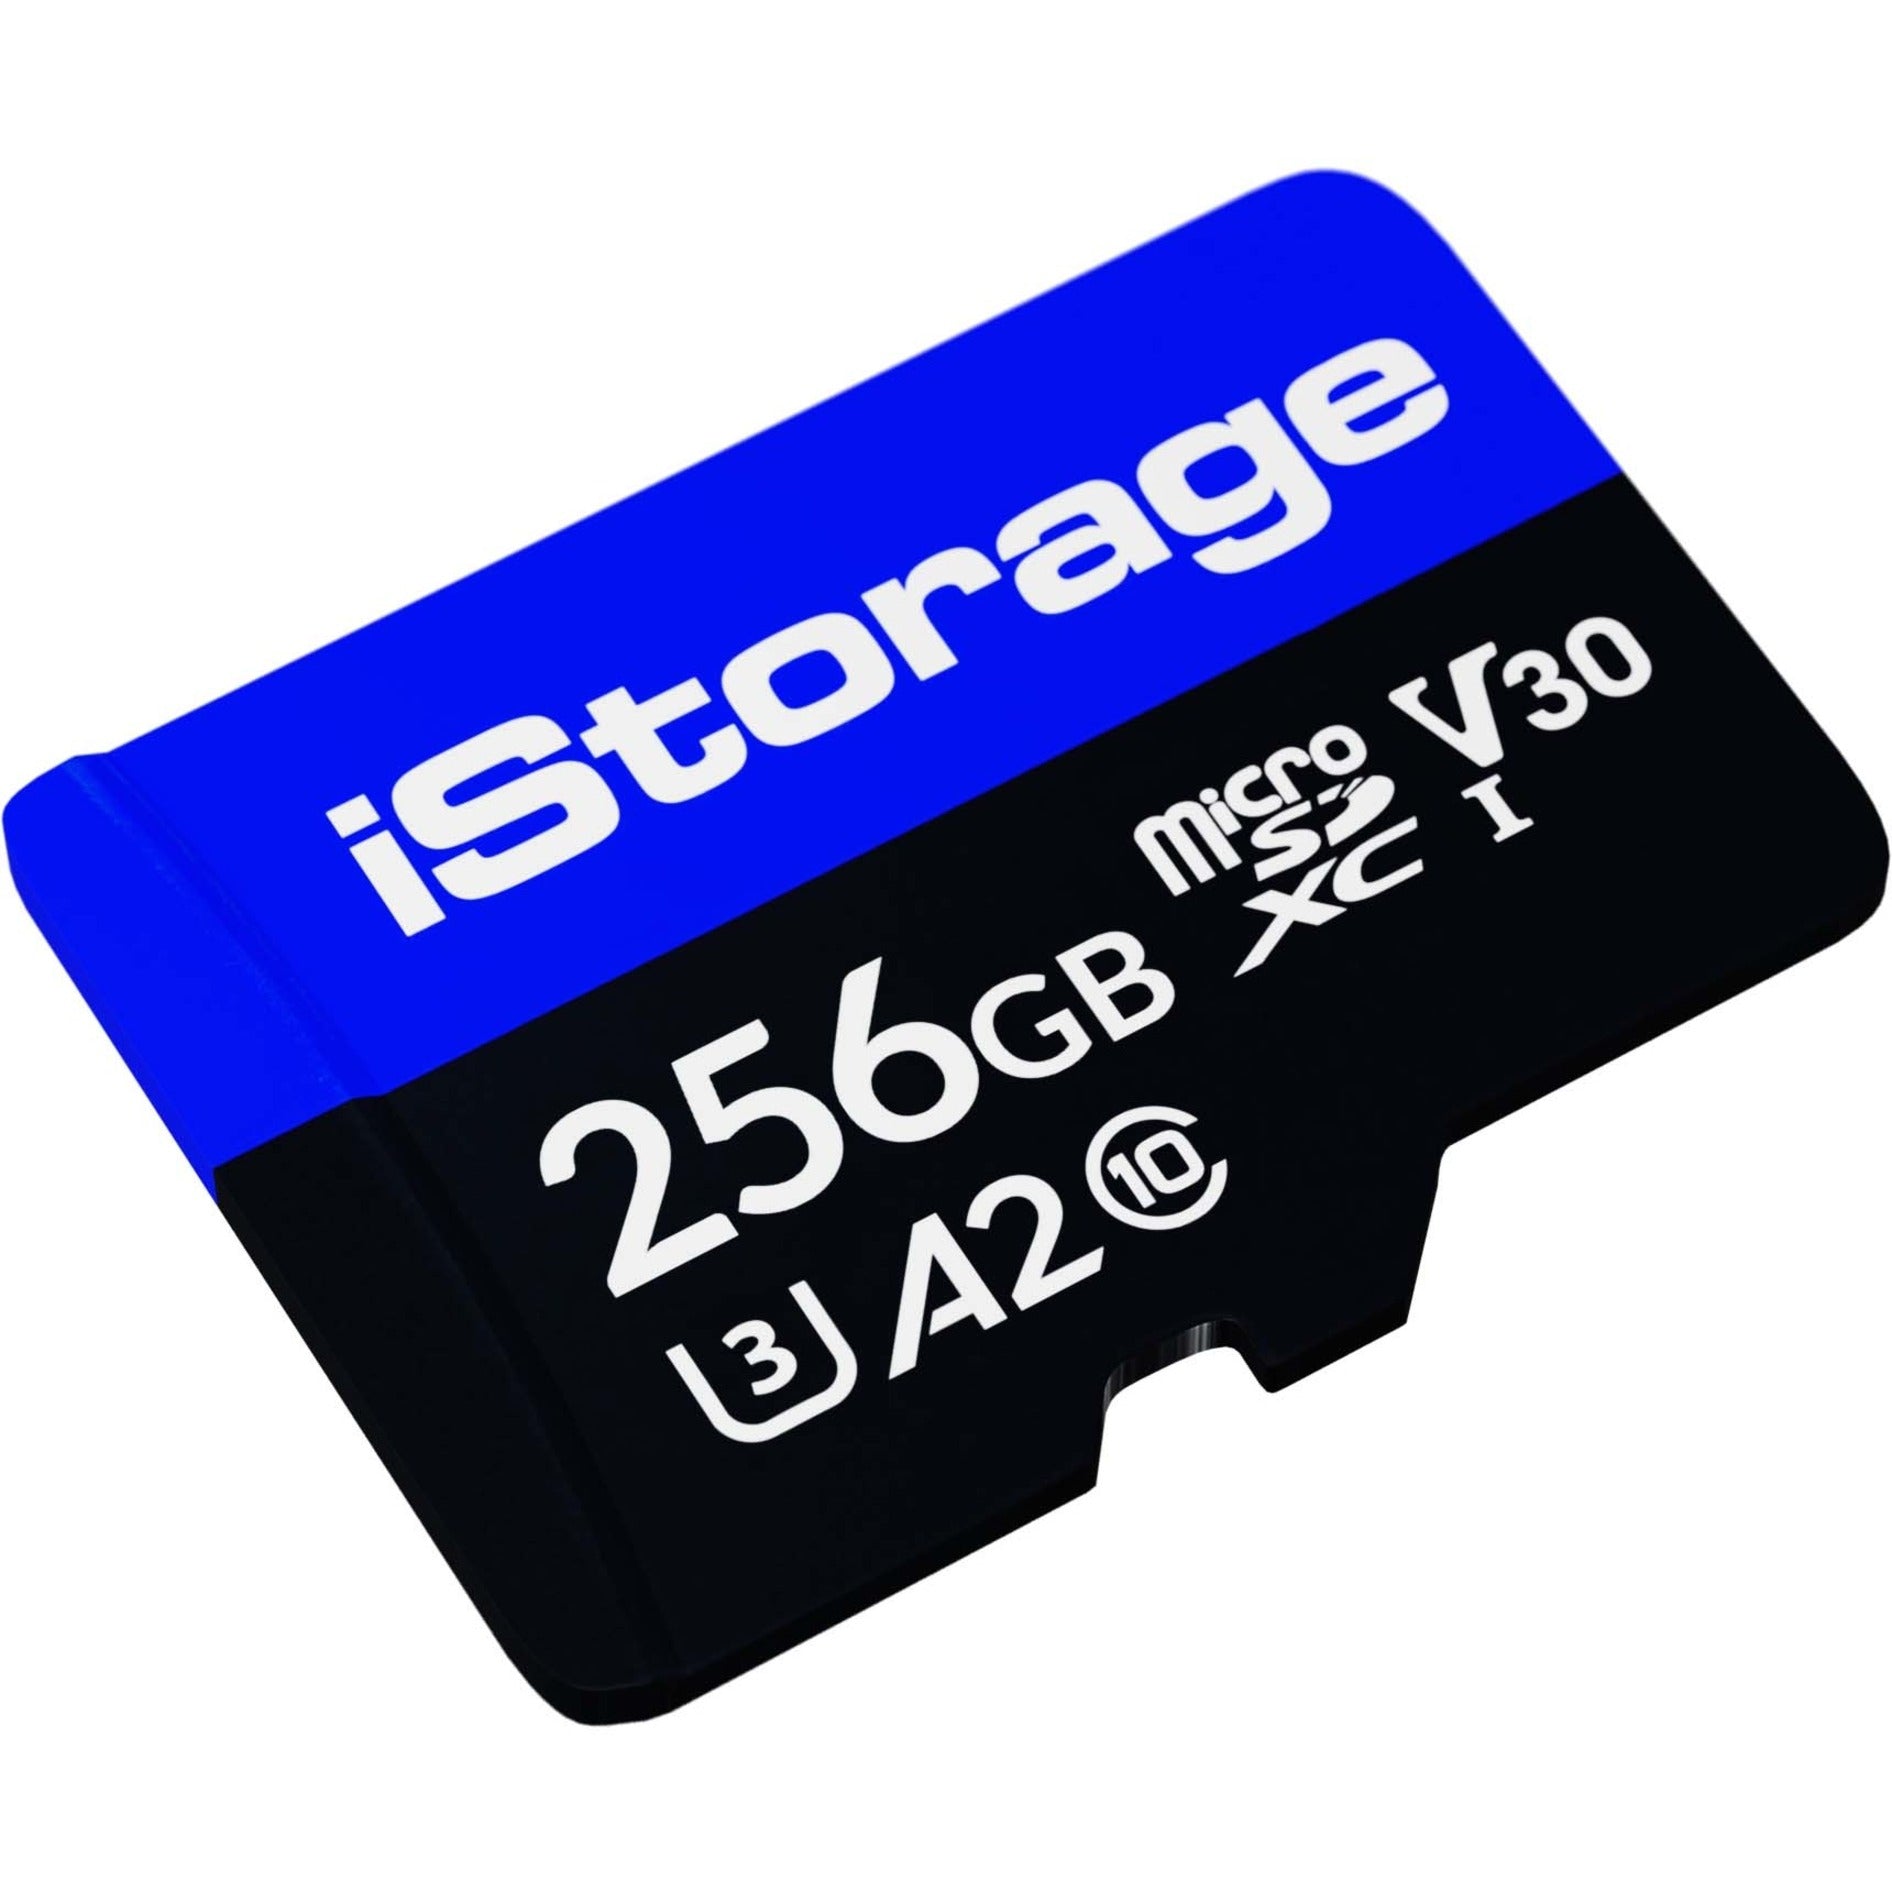 iStorage IS-MSD-1-256 256GB MicroSDXC Card, High-Speed Storage for Your Devices